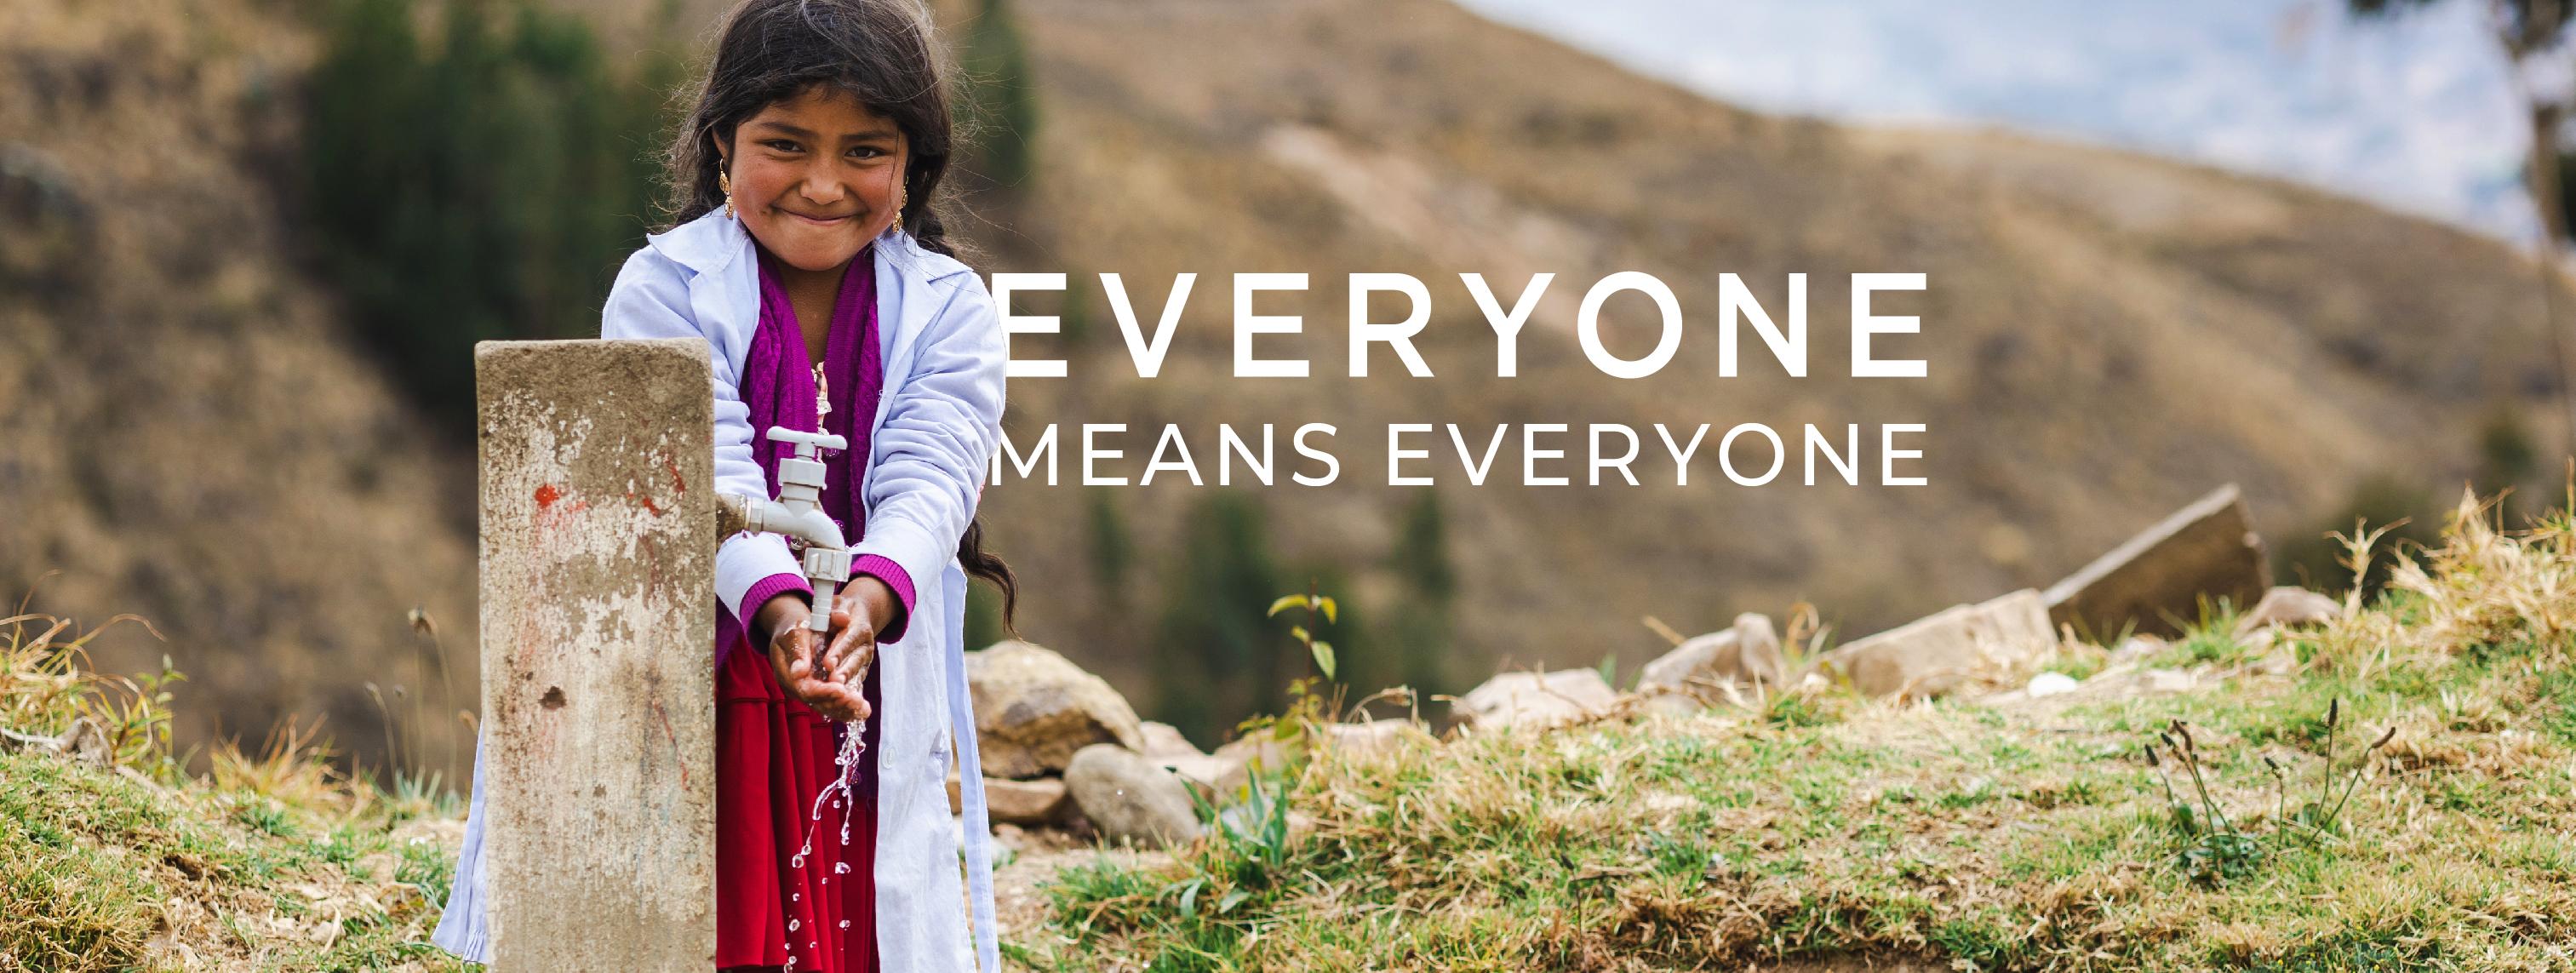 A young girl washes her hands at a tap with mountains in the background. Text over the image says Everyone Means Everyone